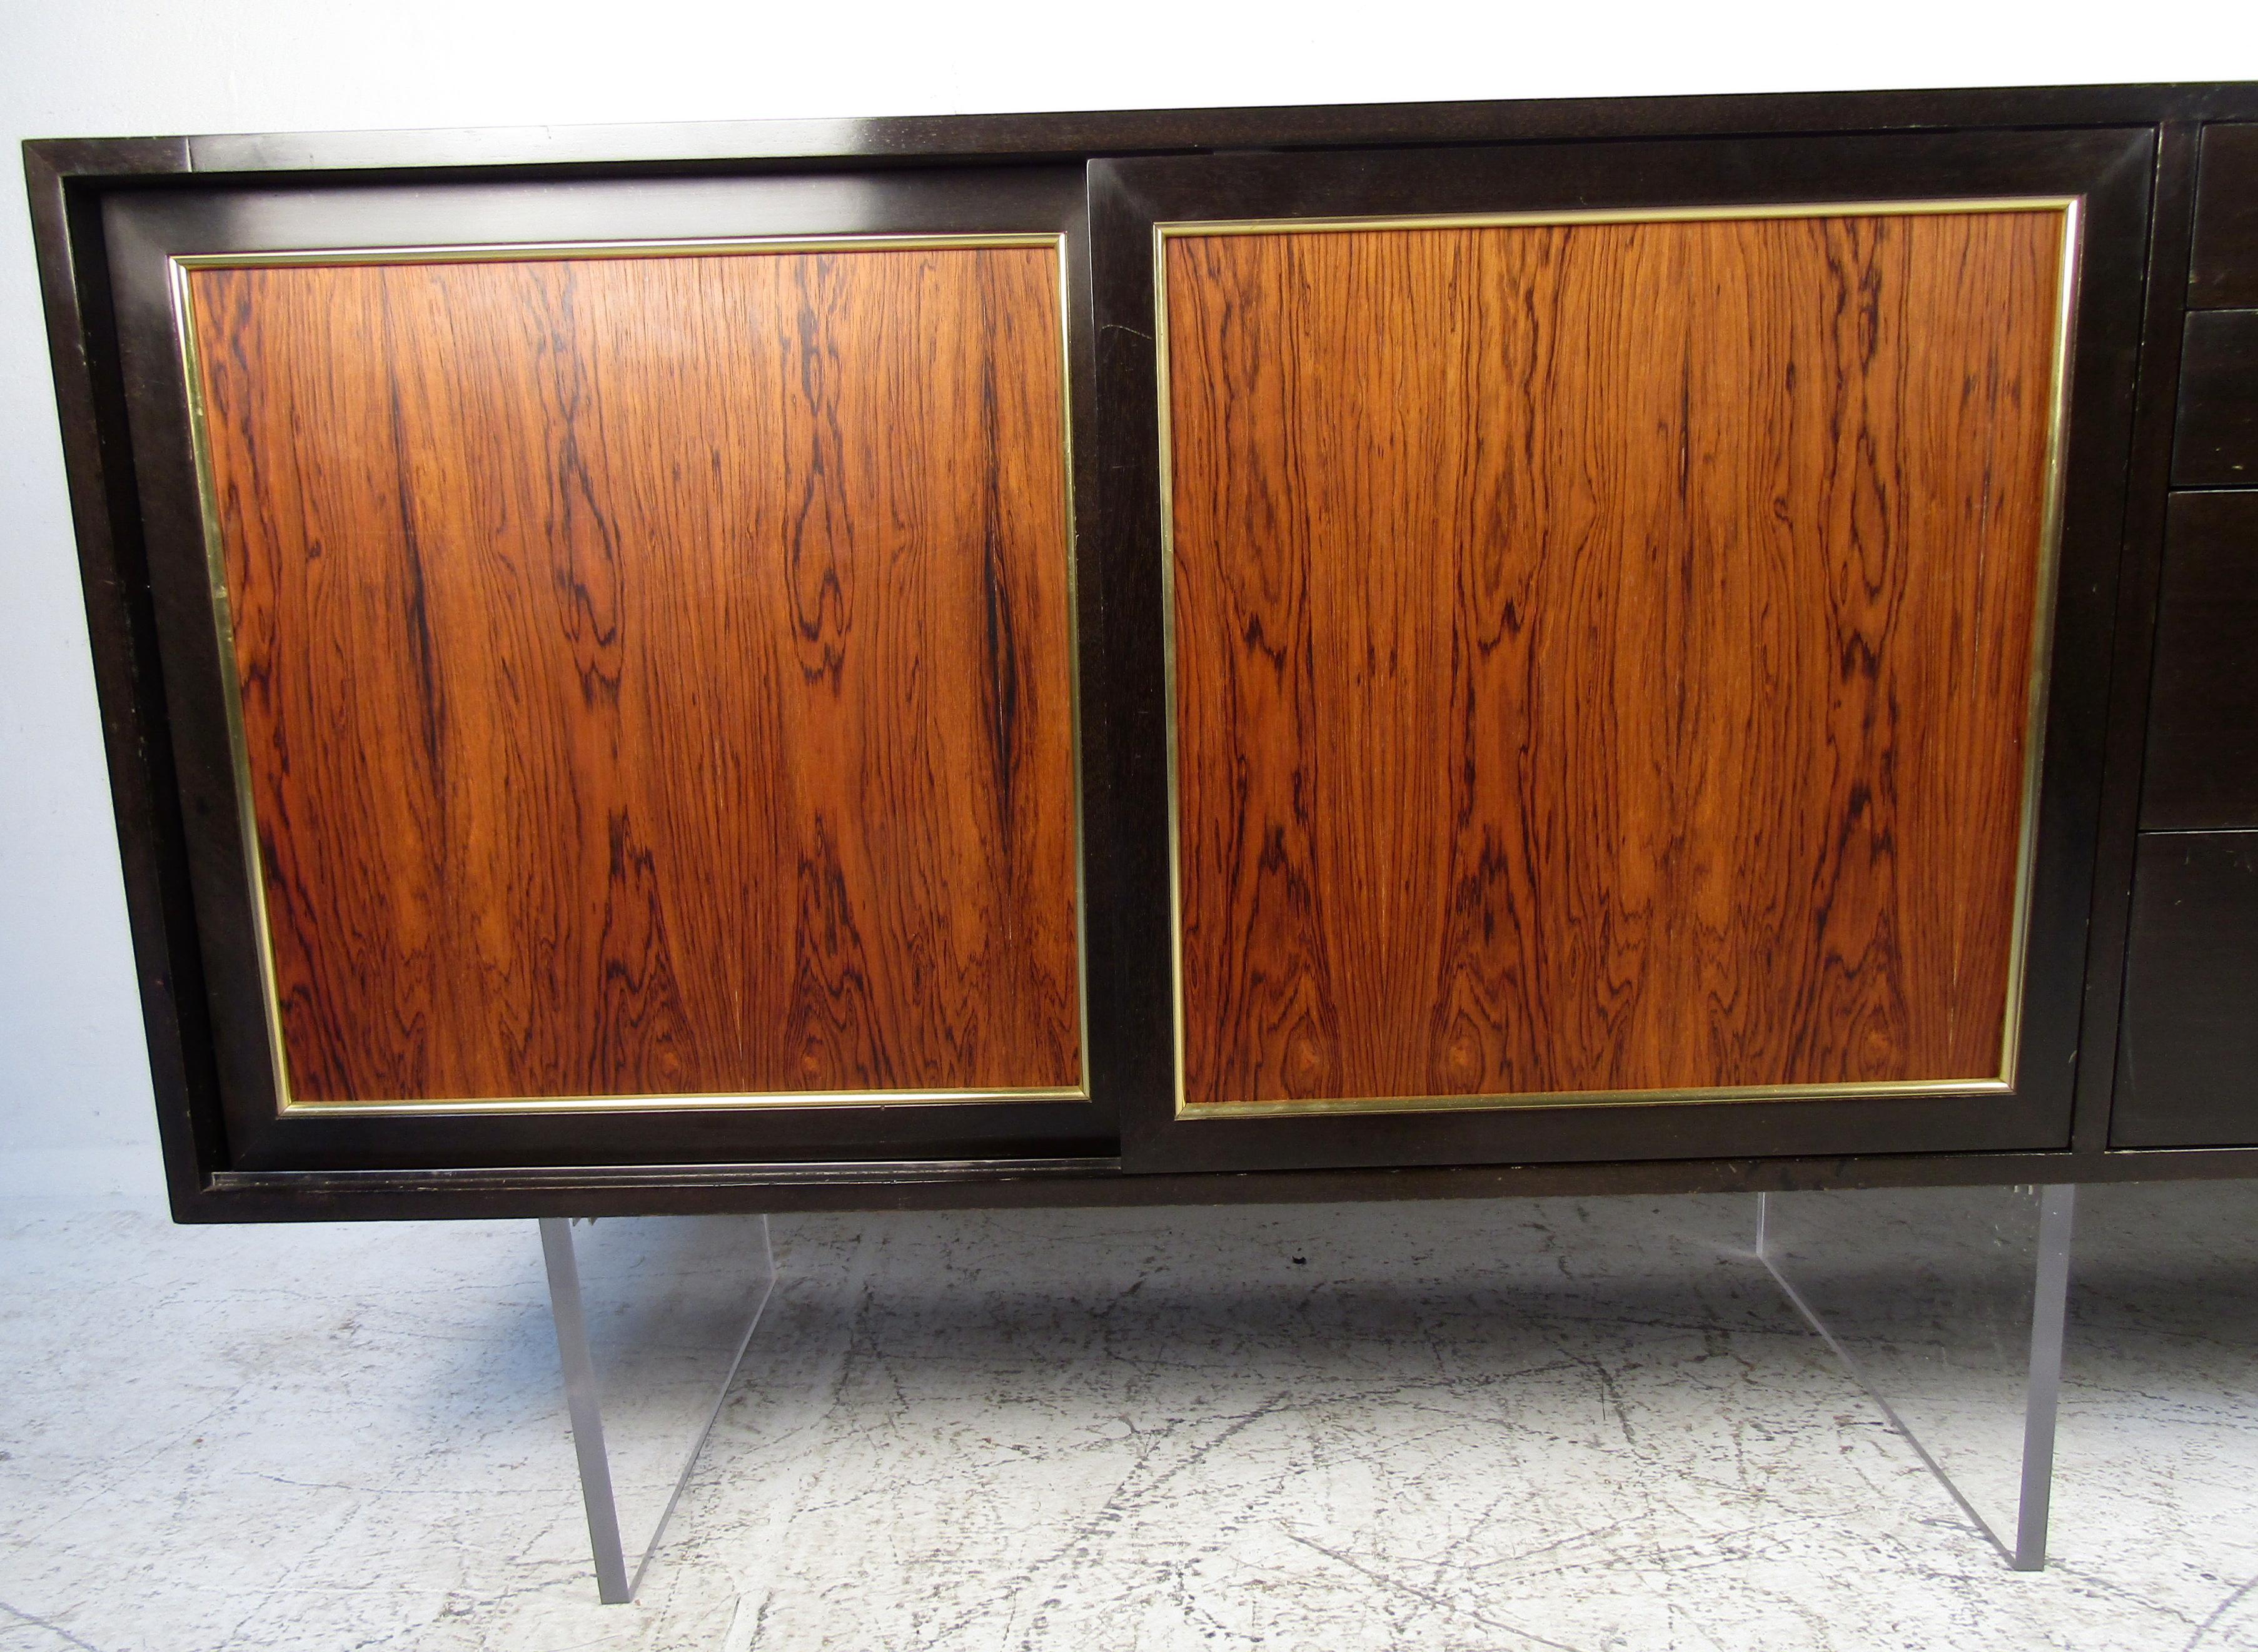 Vintage modern hutch featured in rich rosewood grain, Lucite base, four drawers, spacious storage space, and brass trimming. 

Please confirm the item location (NY or NJ).
 